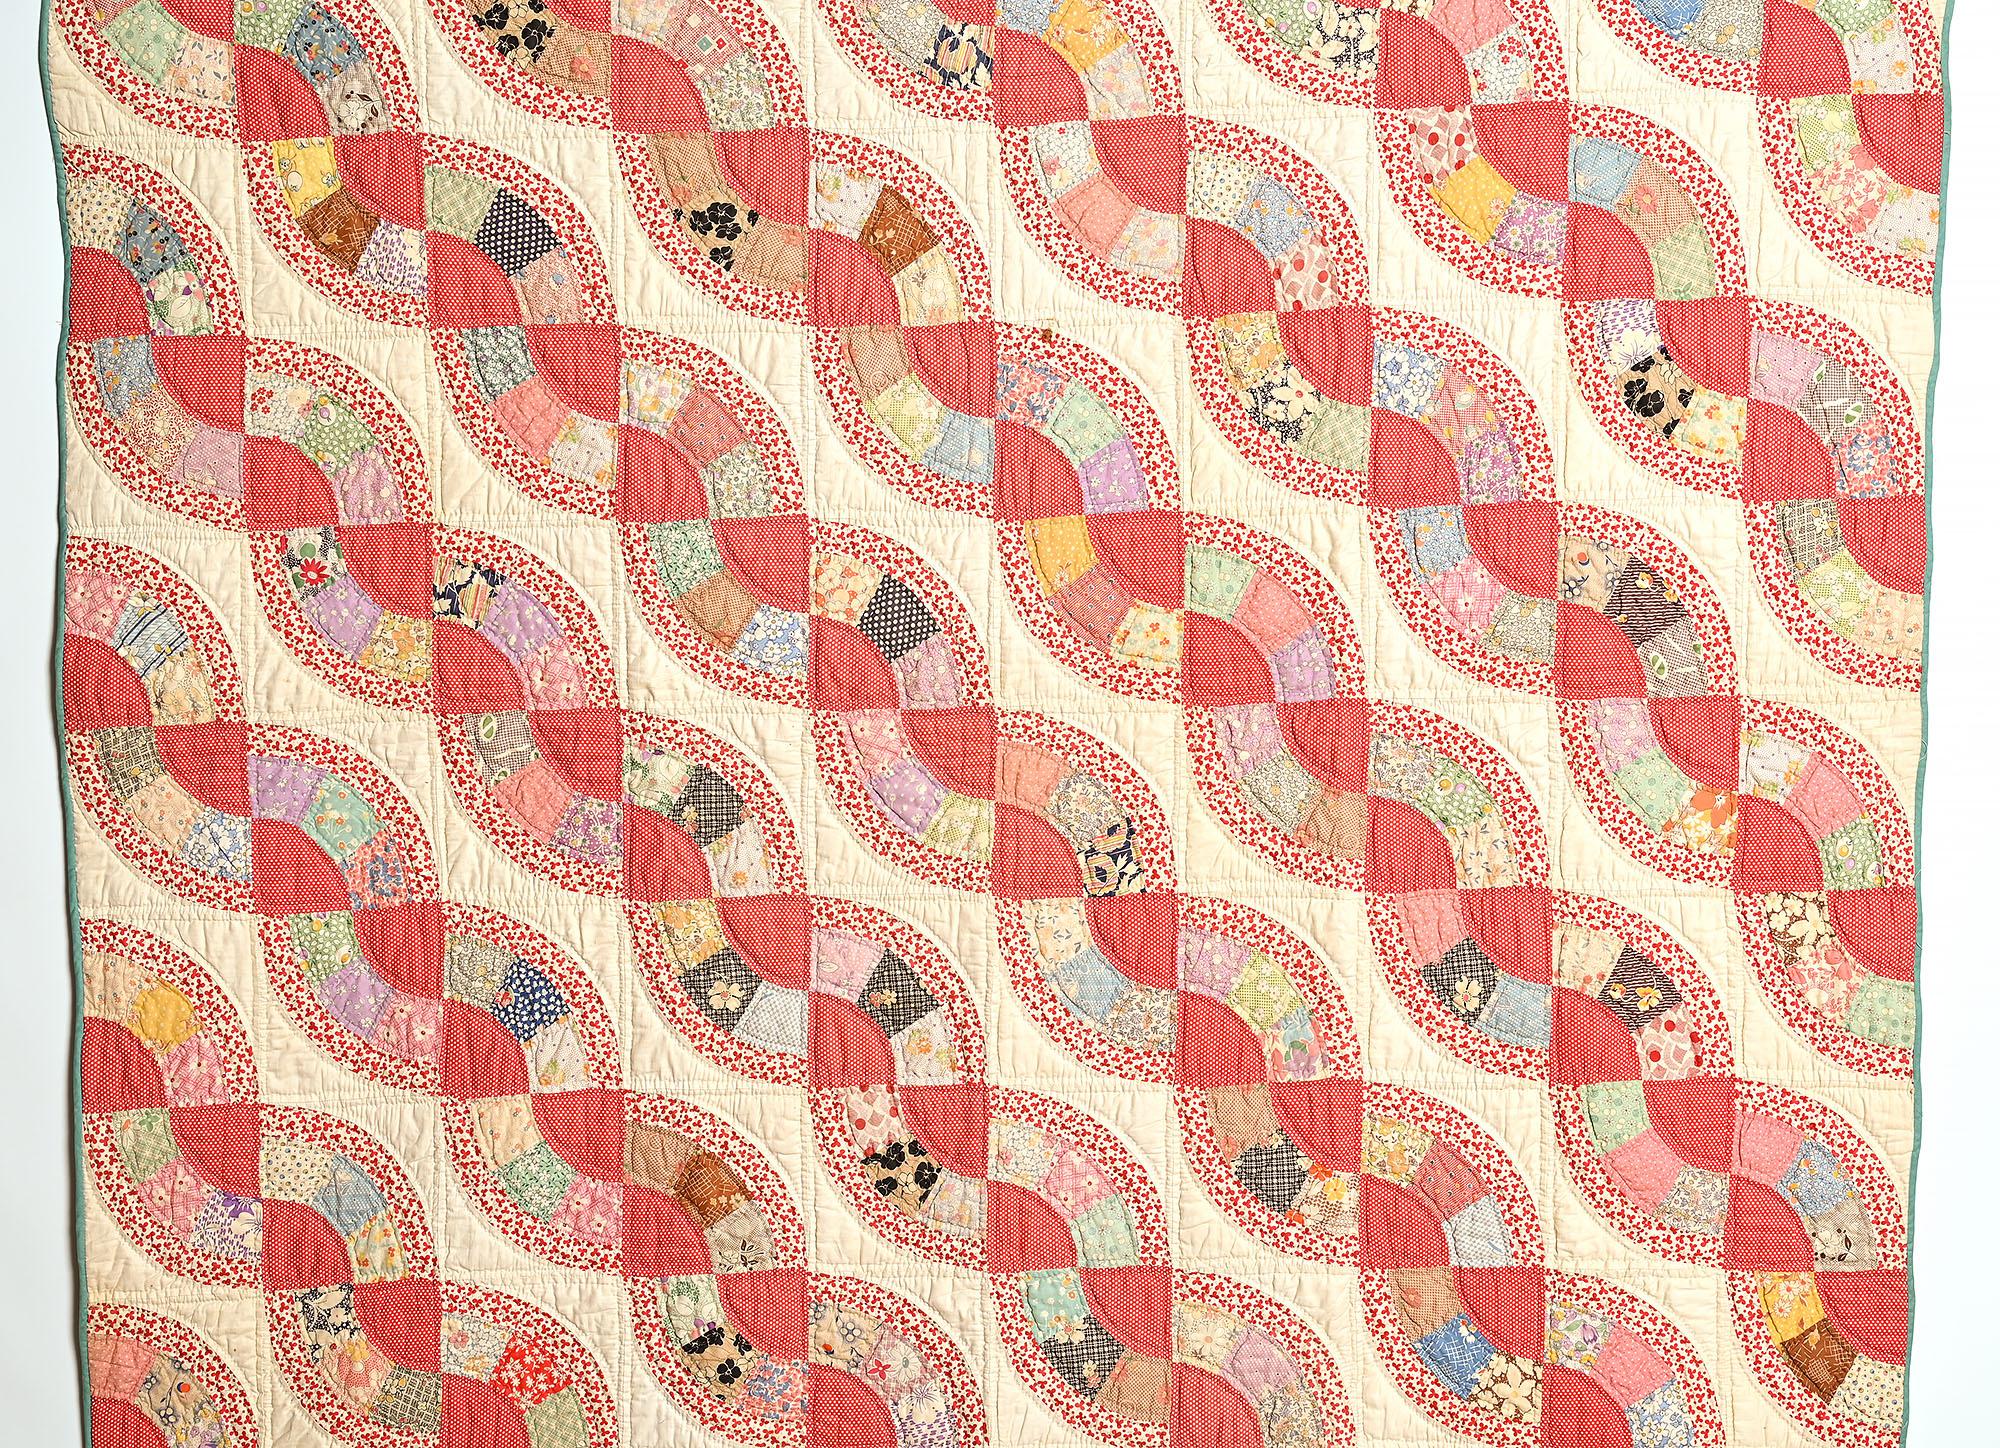 This cheerful Snail's Trail quilt done in an assortment of 1930's printed fabrics. Tiny white polka dots on red make the centers stand out while outlined in a print with three leaf clovers. This is a pattern not often seen. The size of the quilt as